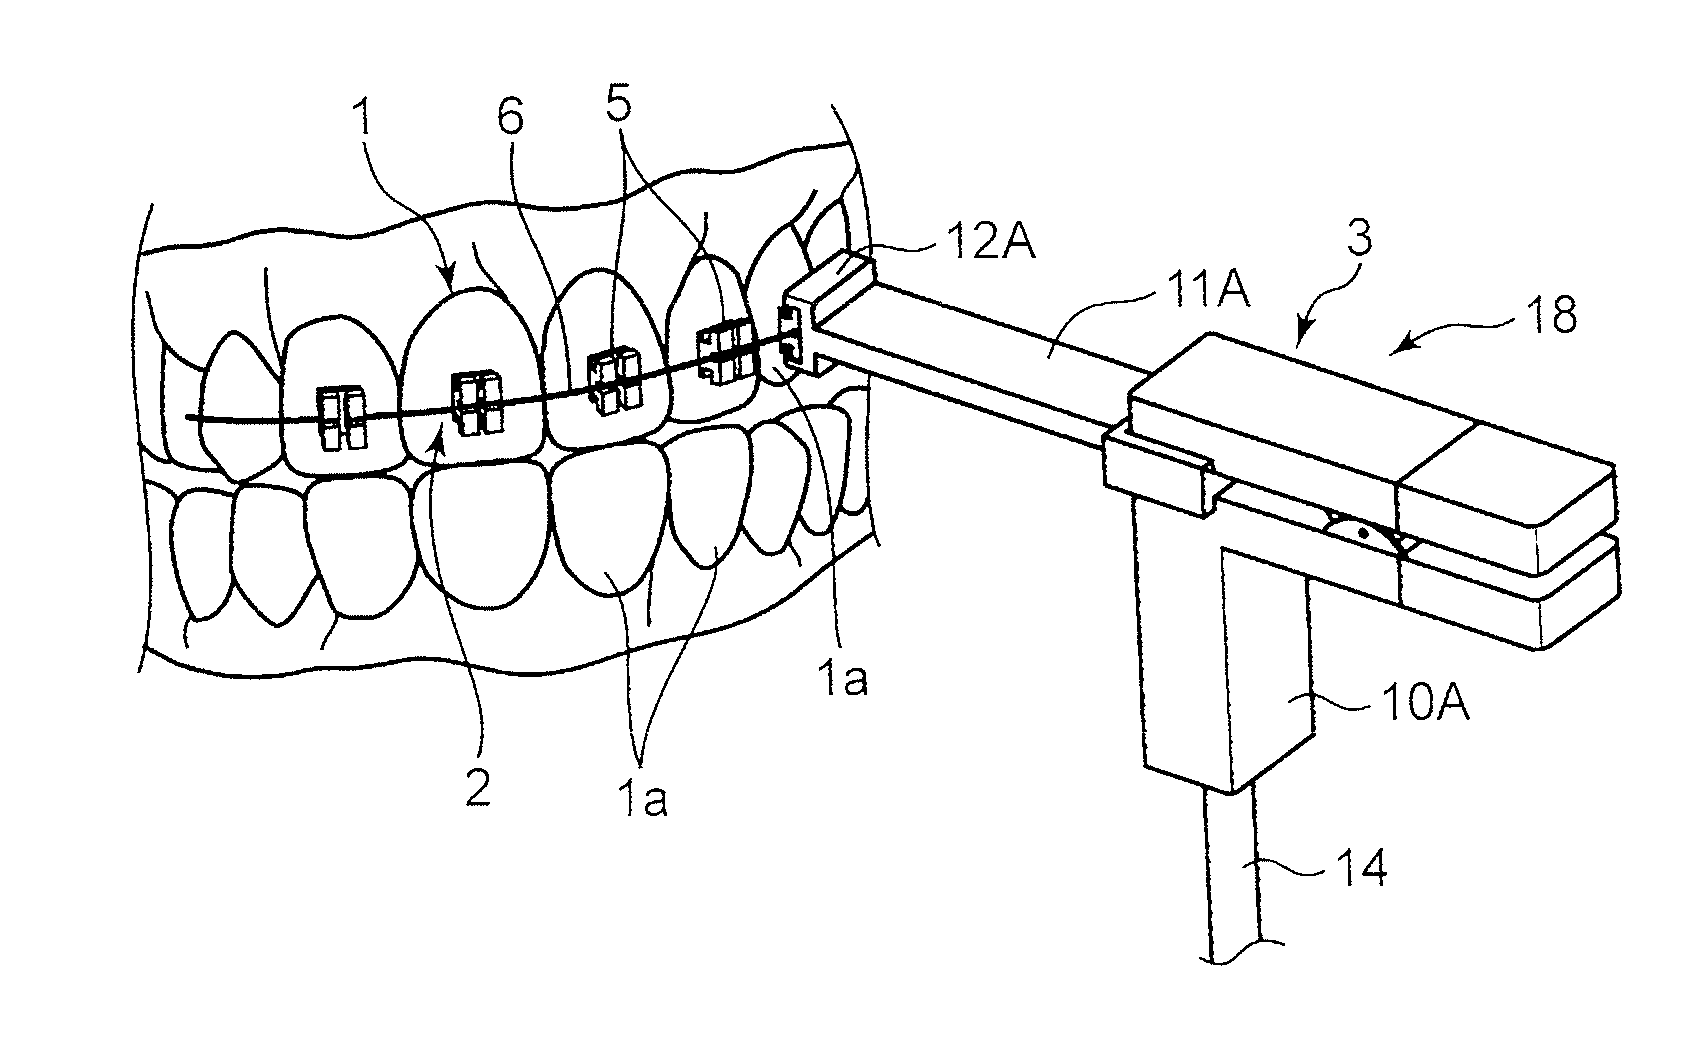 Vibration imparting device for dental use